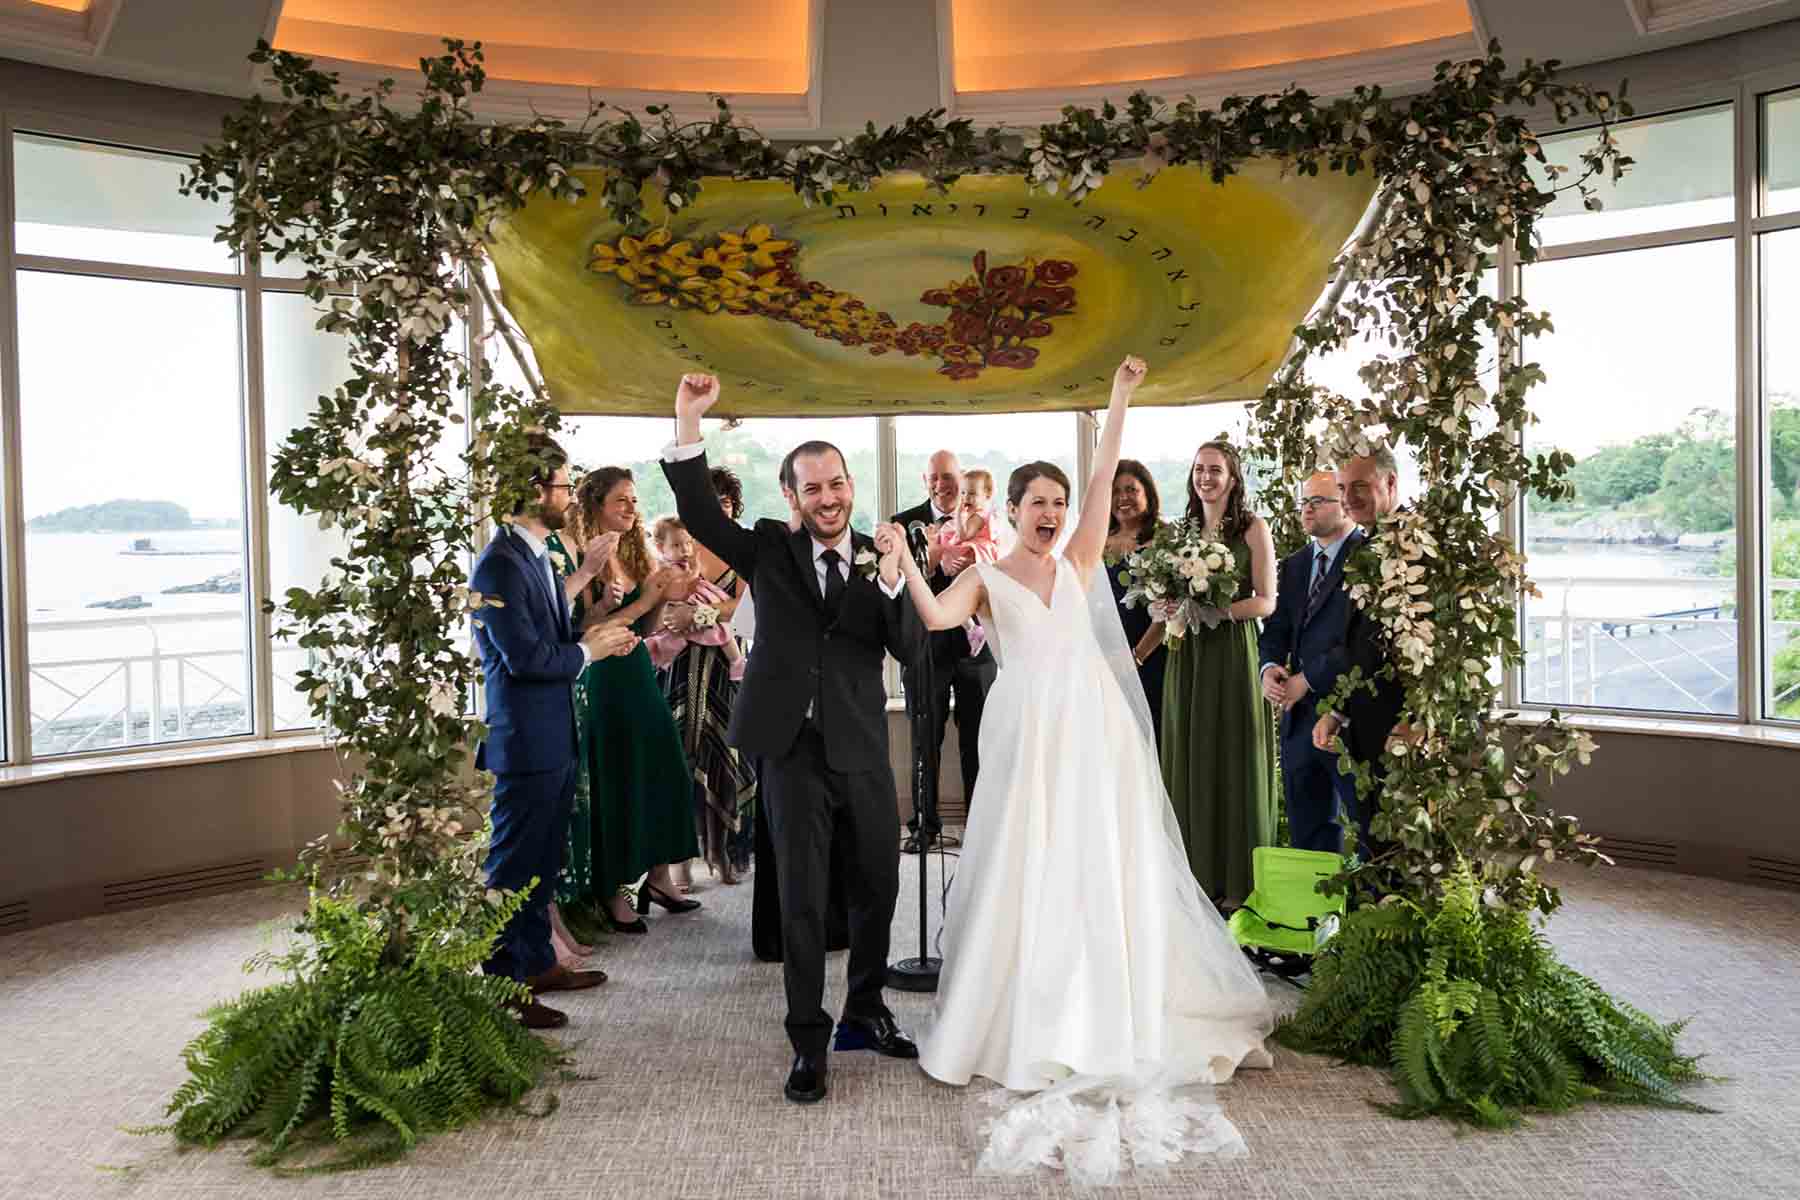 Bride and groom cheering in front of chuppah and family for an article on the best wedding jobs for family and friends